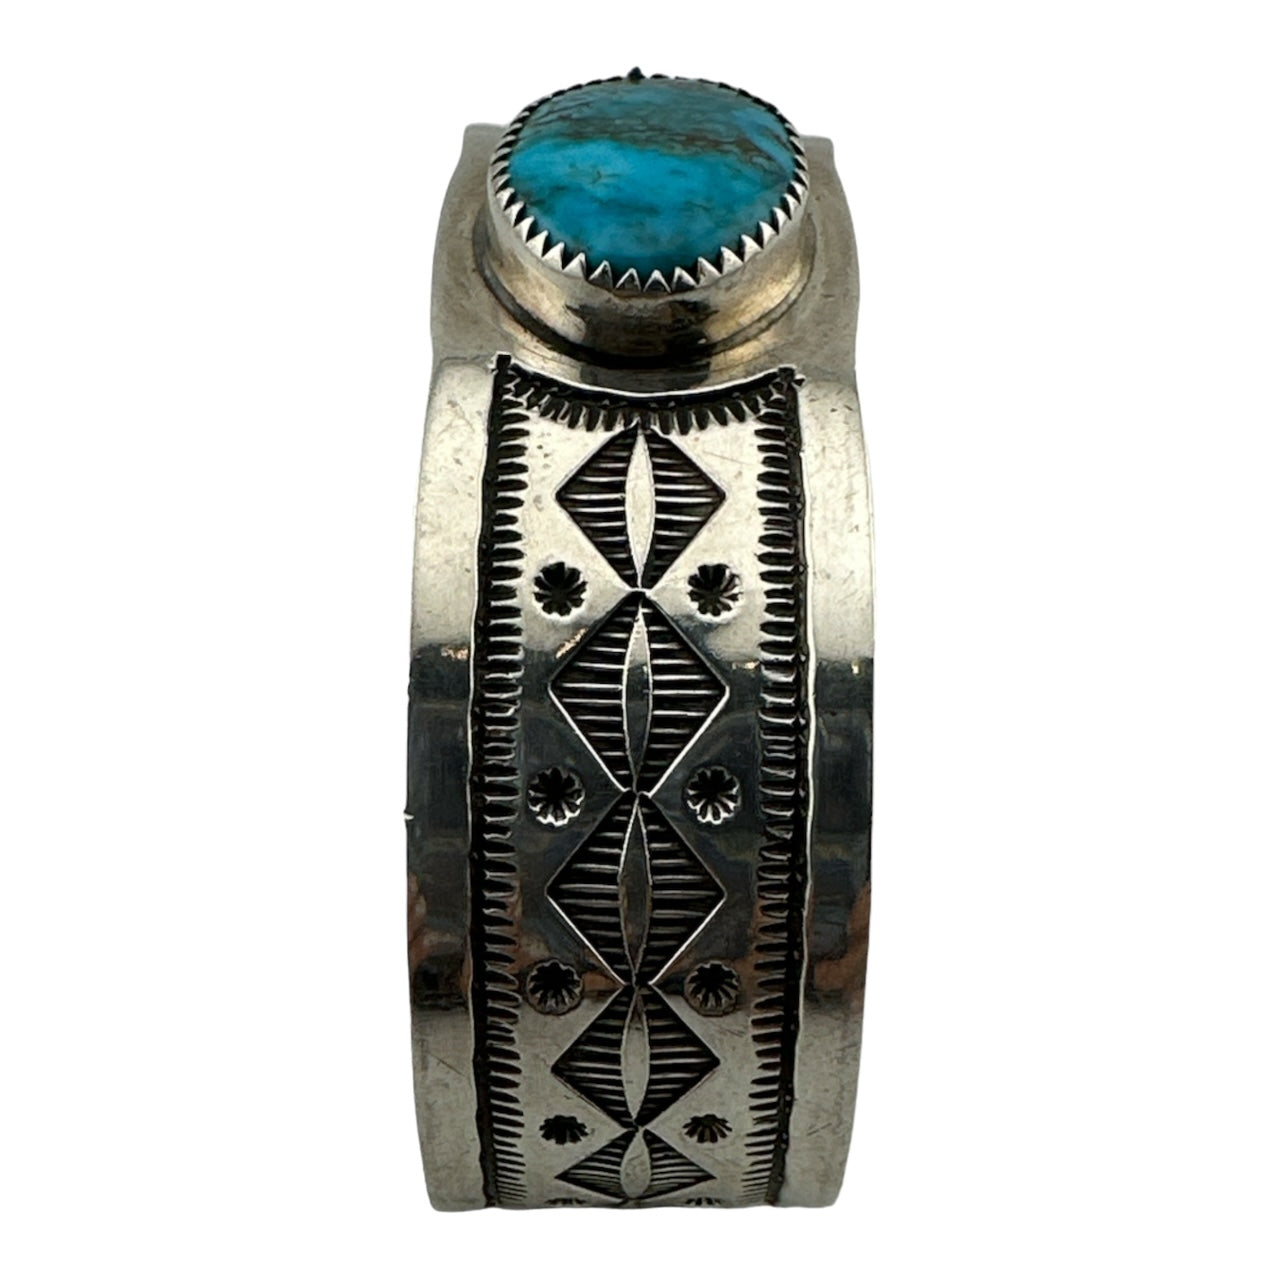 Herman Smith Navajo Turquoise Bracelet, navajo jewelry for sale, turquoise jewelry, indian jewerly, telluride jewelry store 